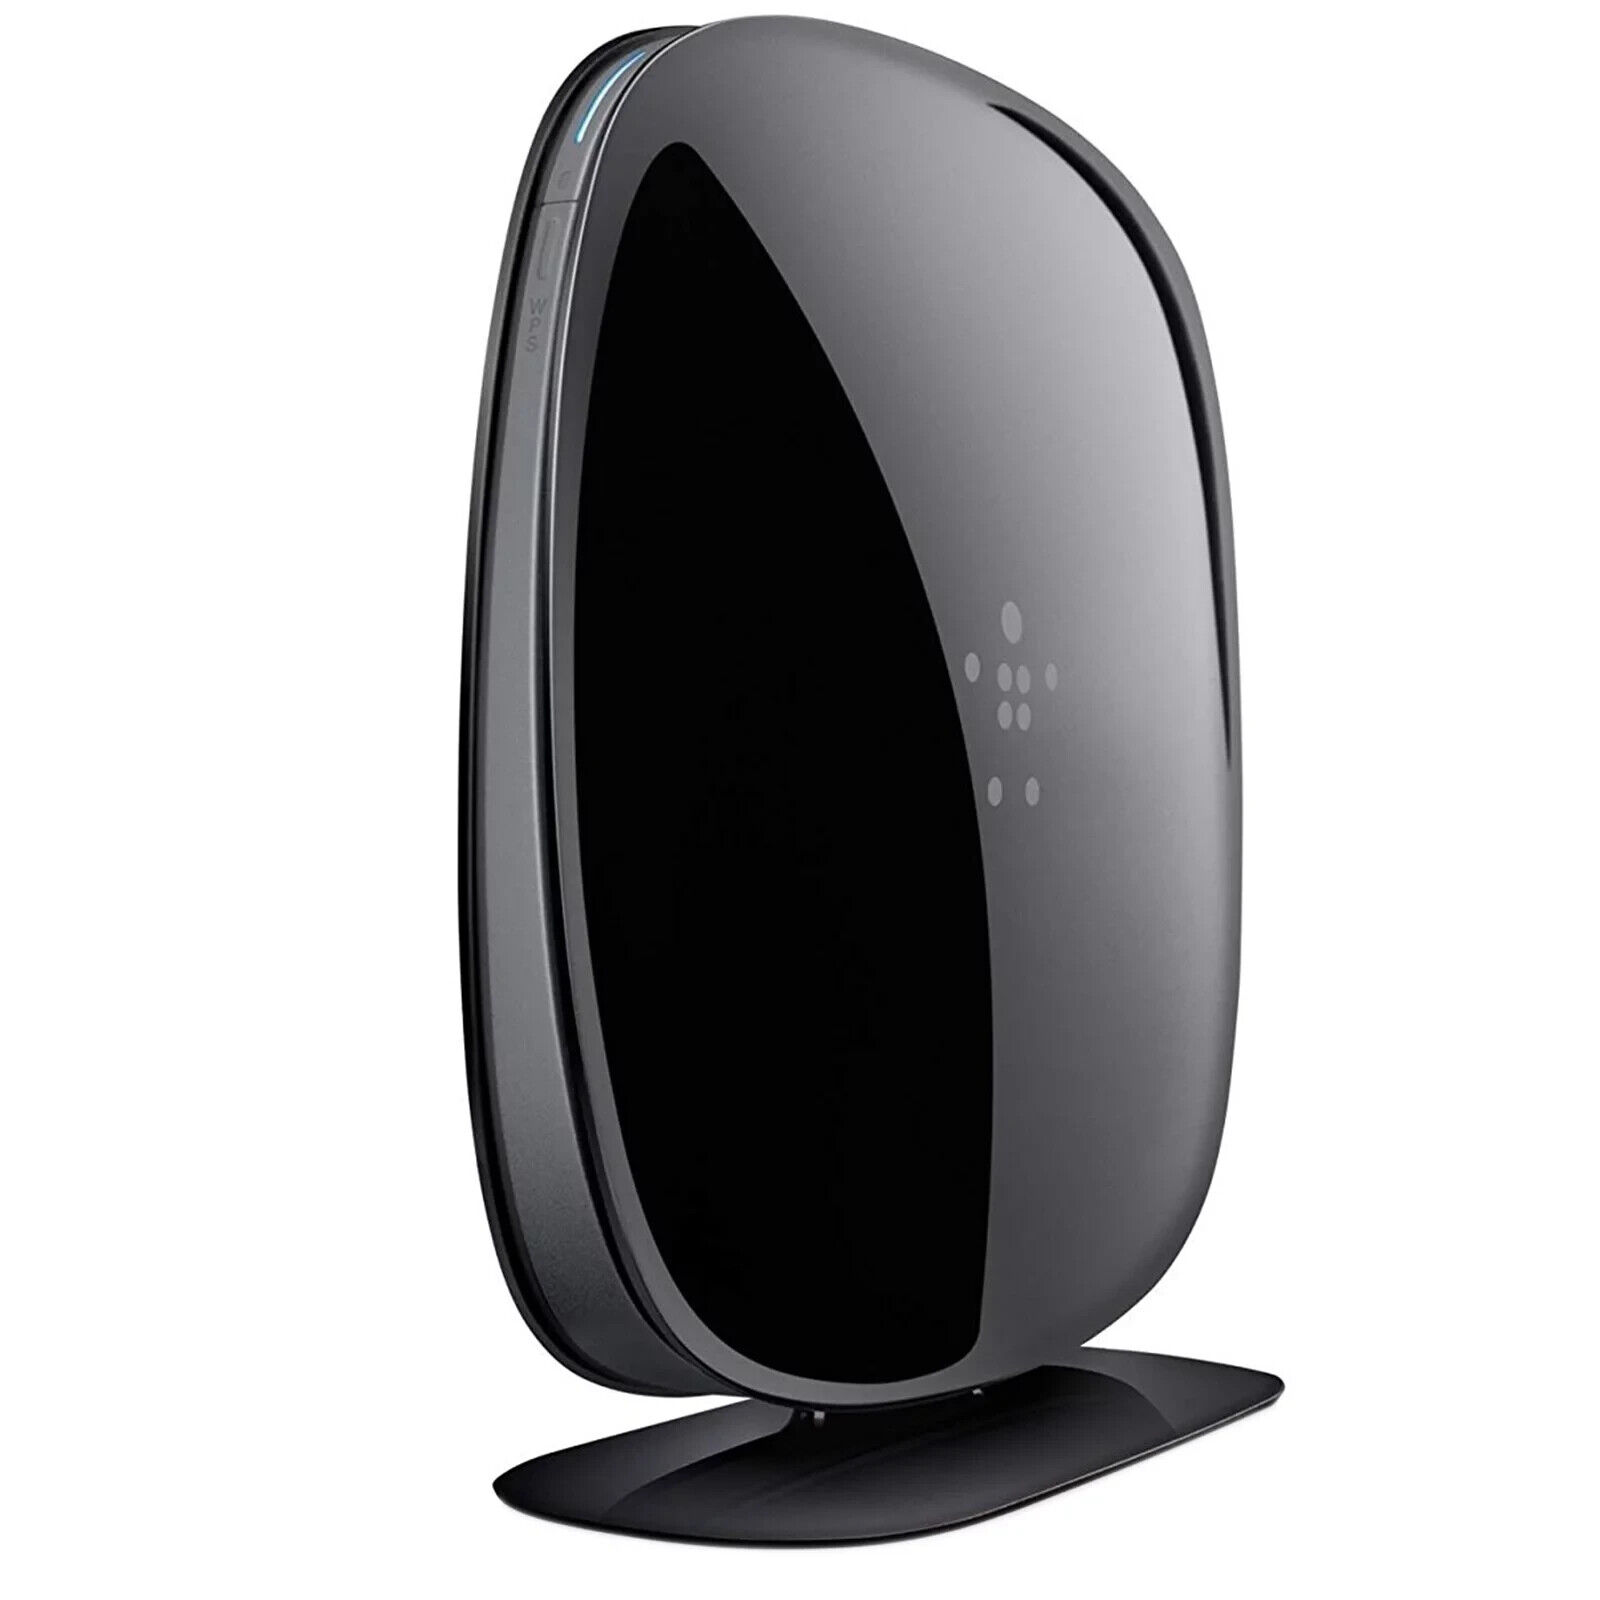 Belkin N600 DB Wi-Fi Dual Band N+ Wireless Router 300 Mbps New